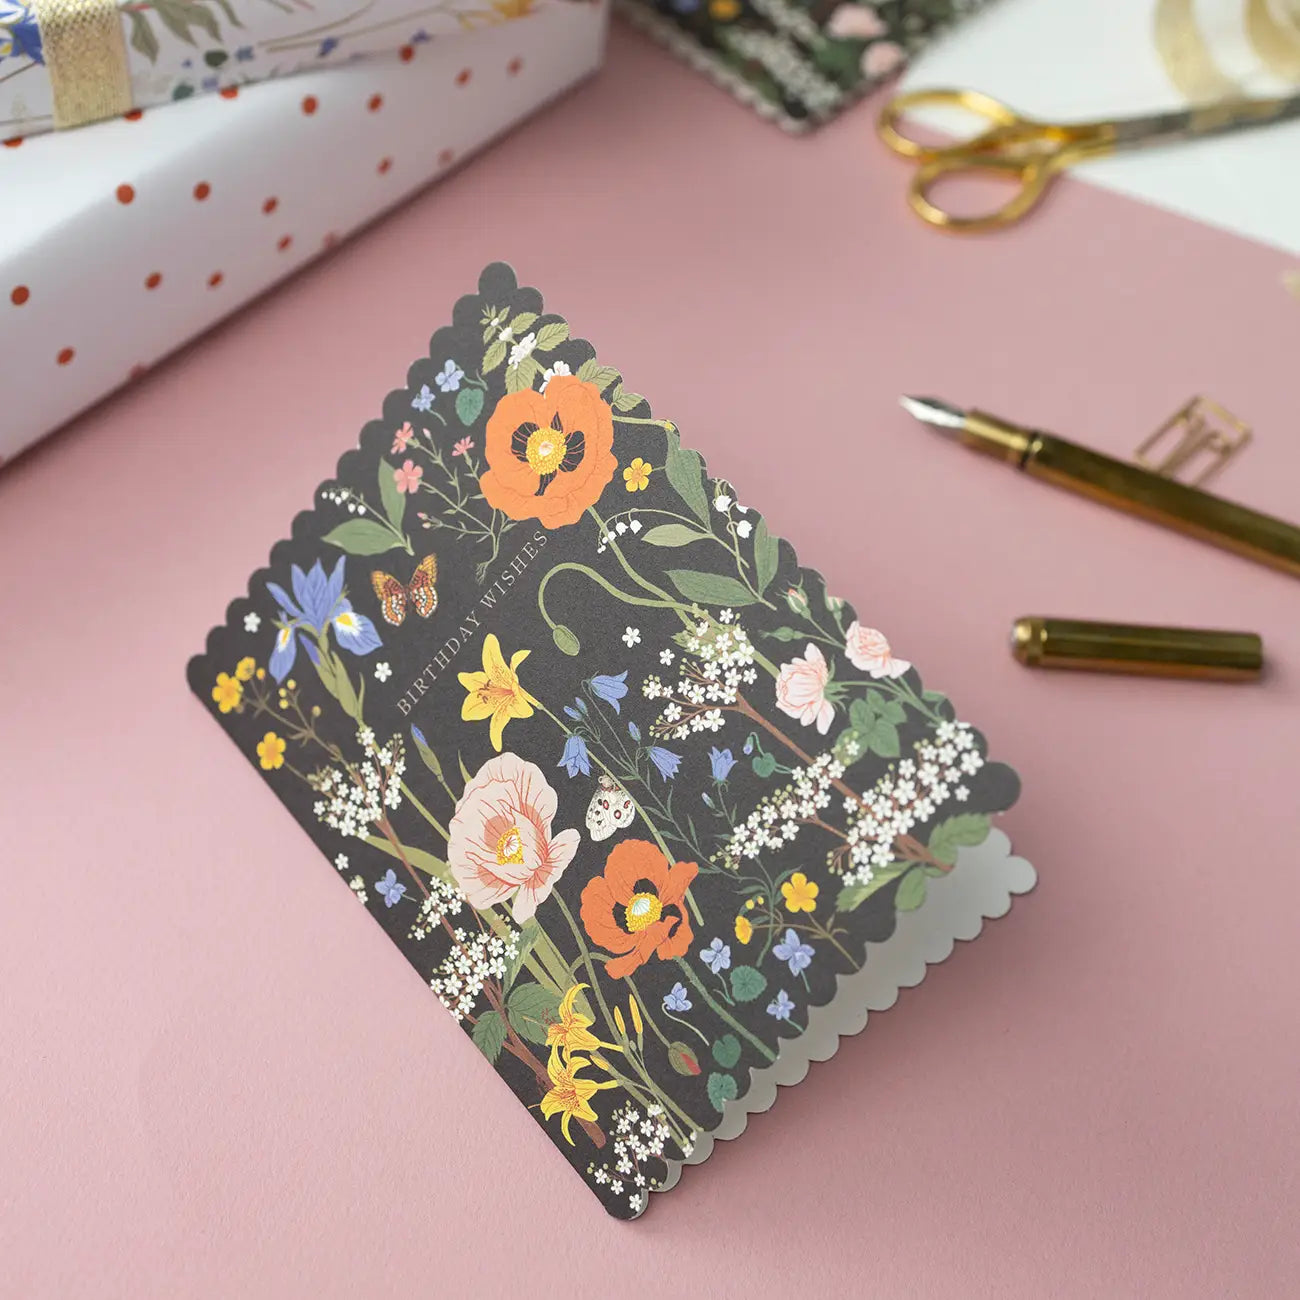 Birthday card 'Wild flowers' by Botanica Paper co.